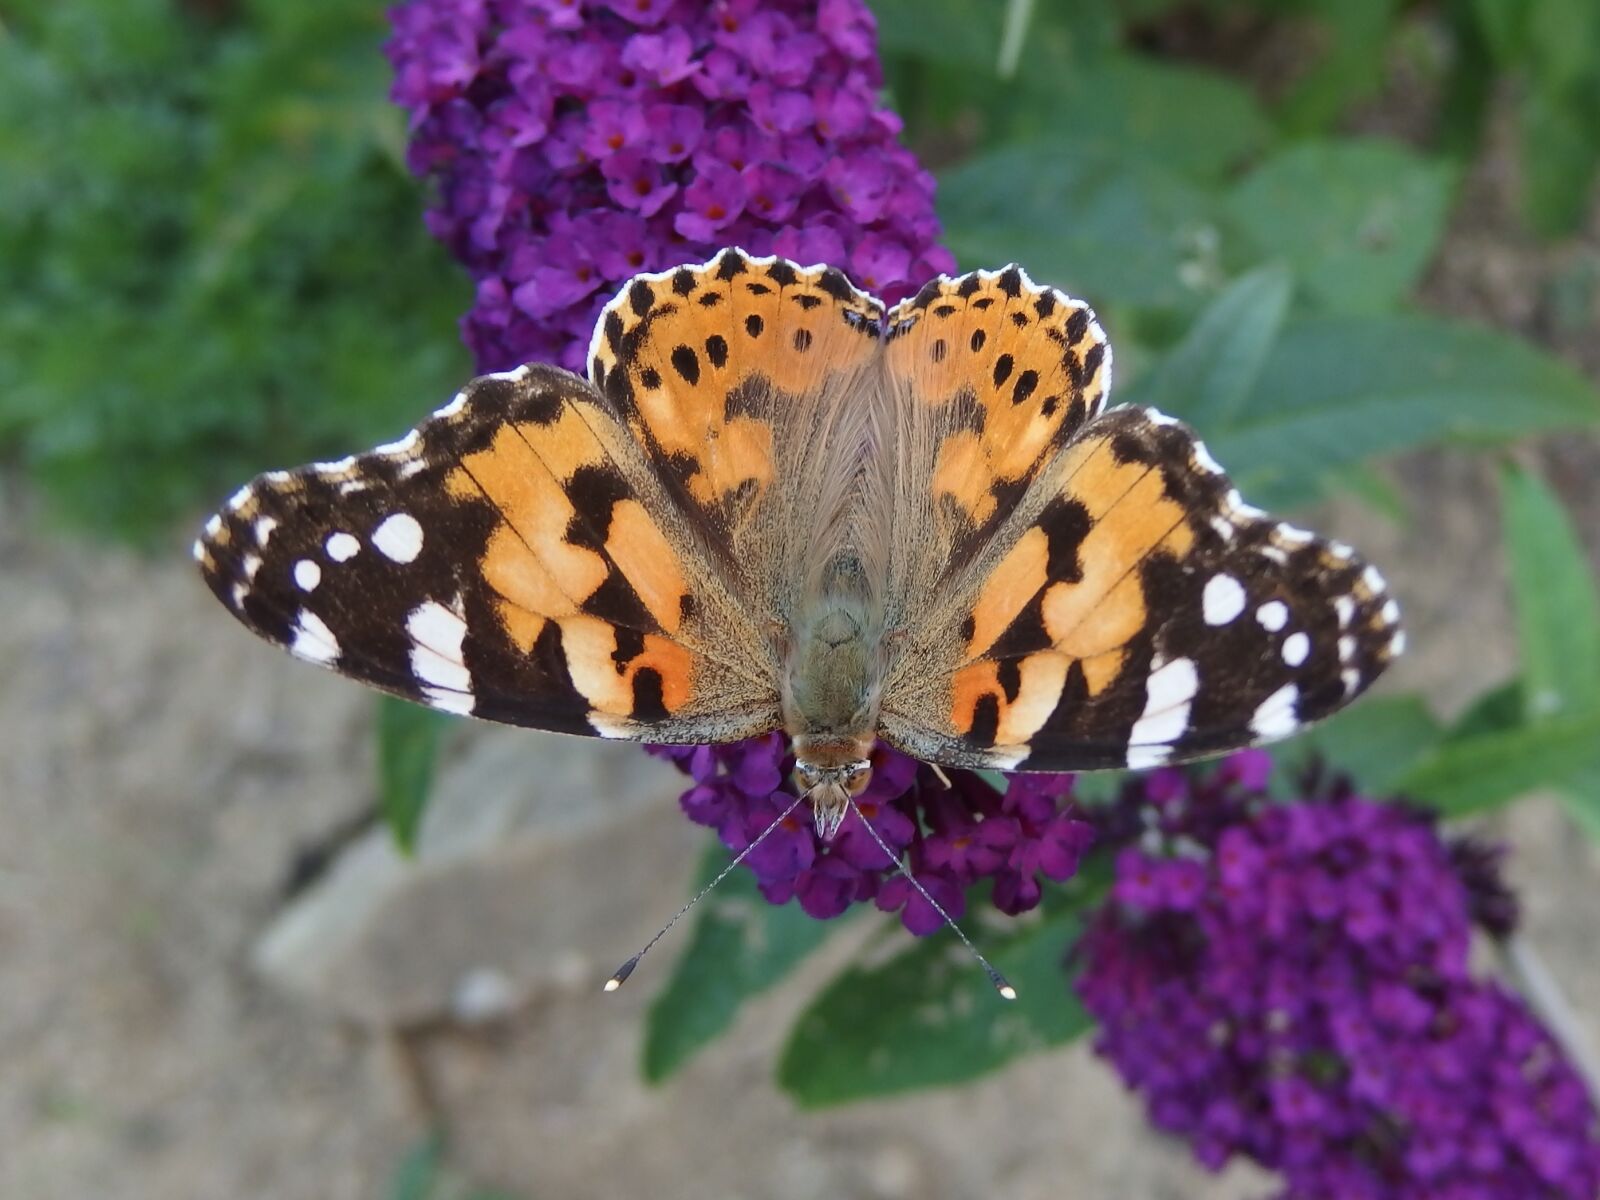 Olympus Stylus XZ-10 sample photo. The painted lady butterfly photography